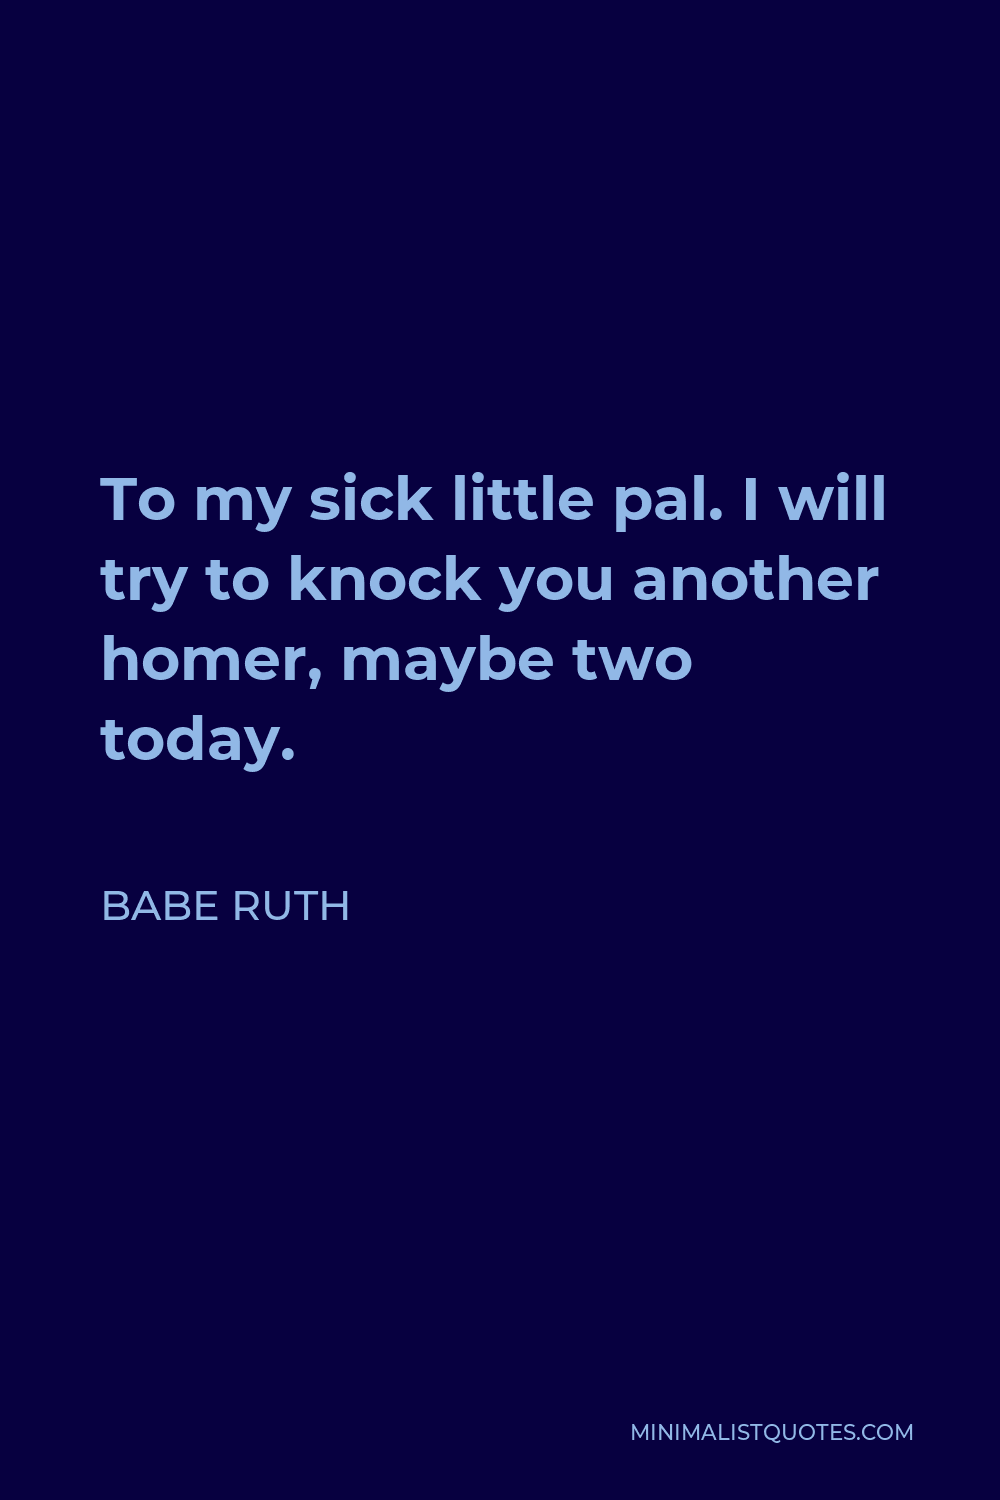 Babe Ruth Quote - To my sick little pal. I will try to knock you another homer, maybe two today.